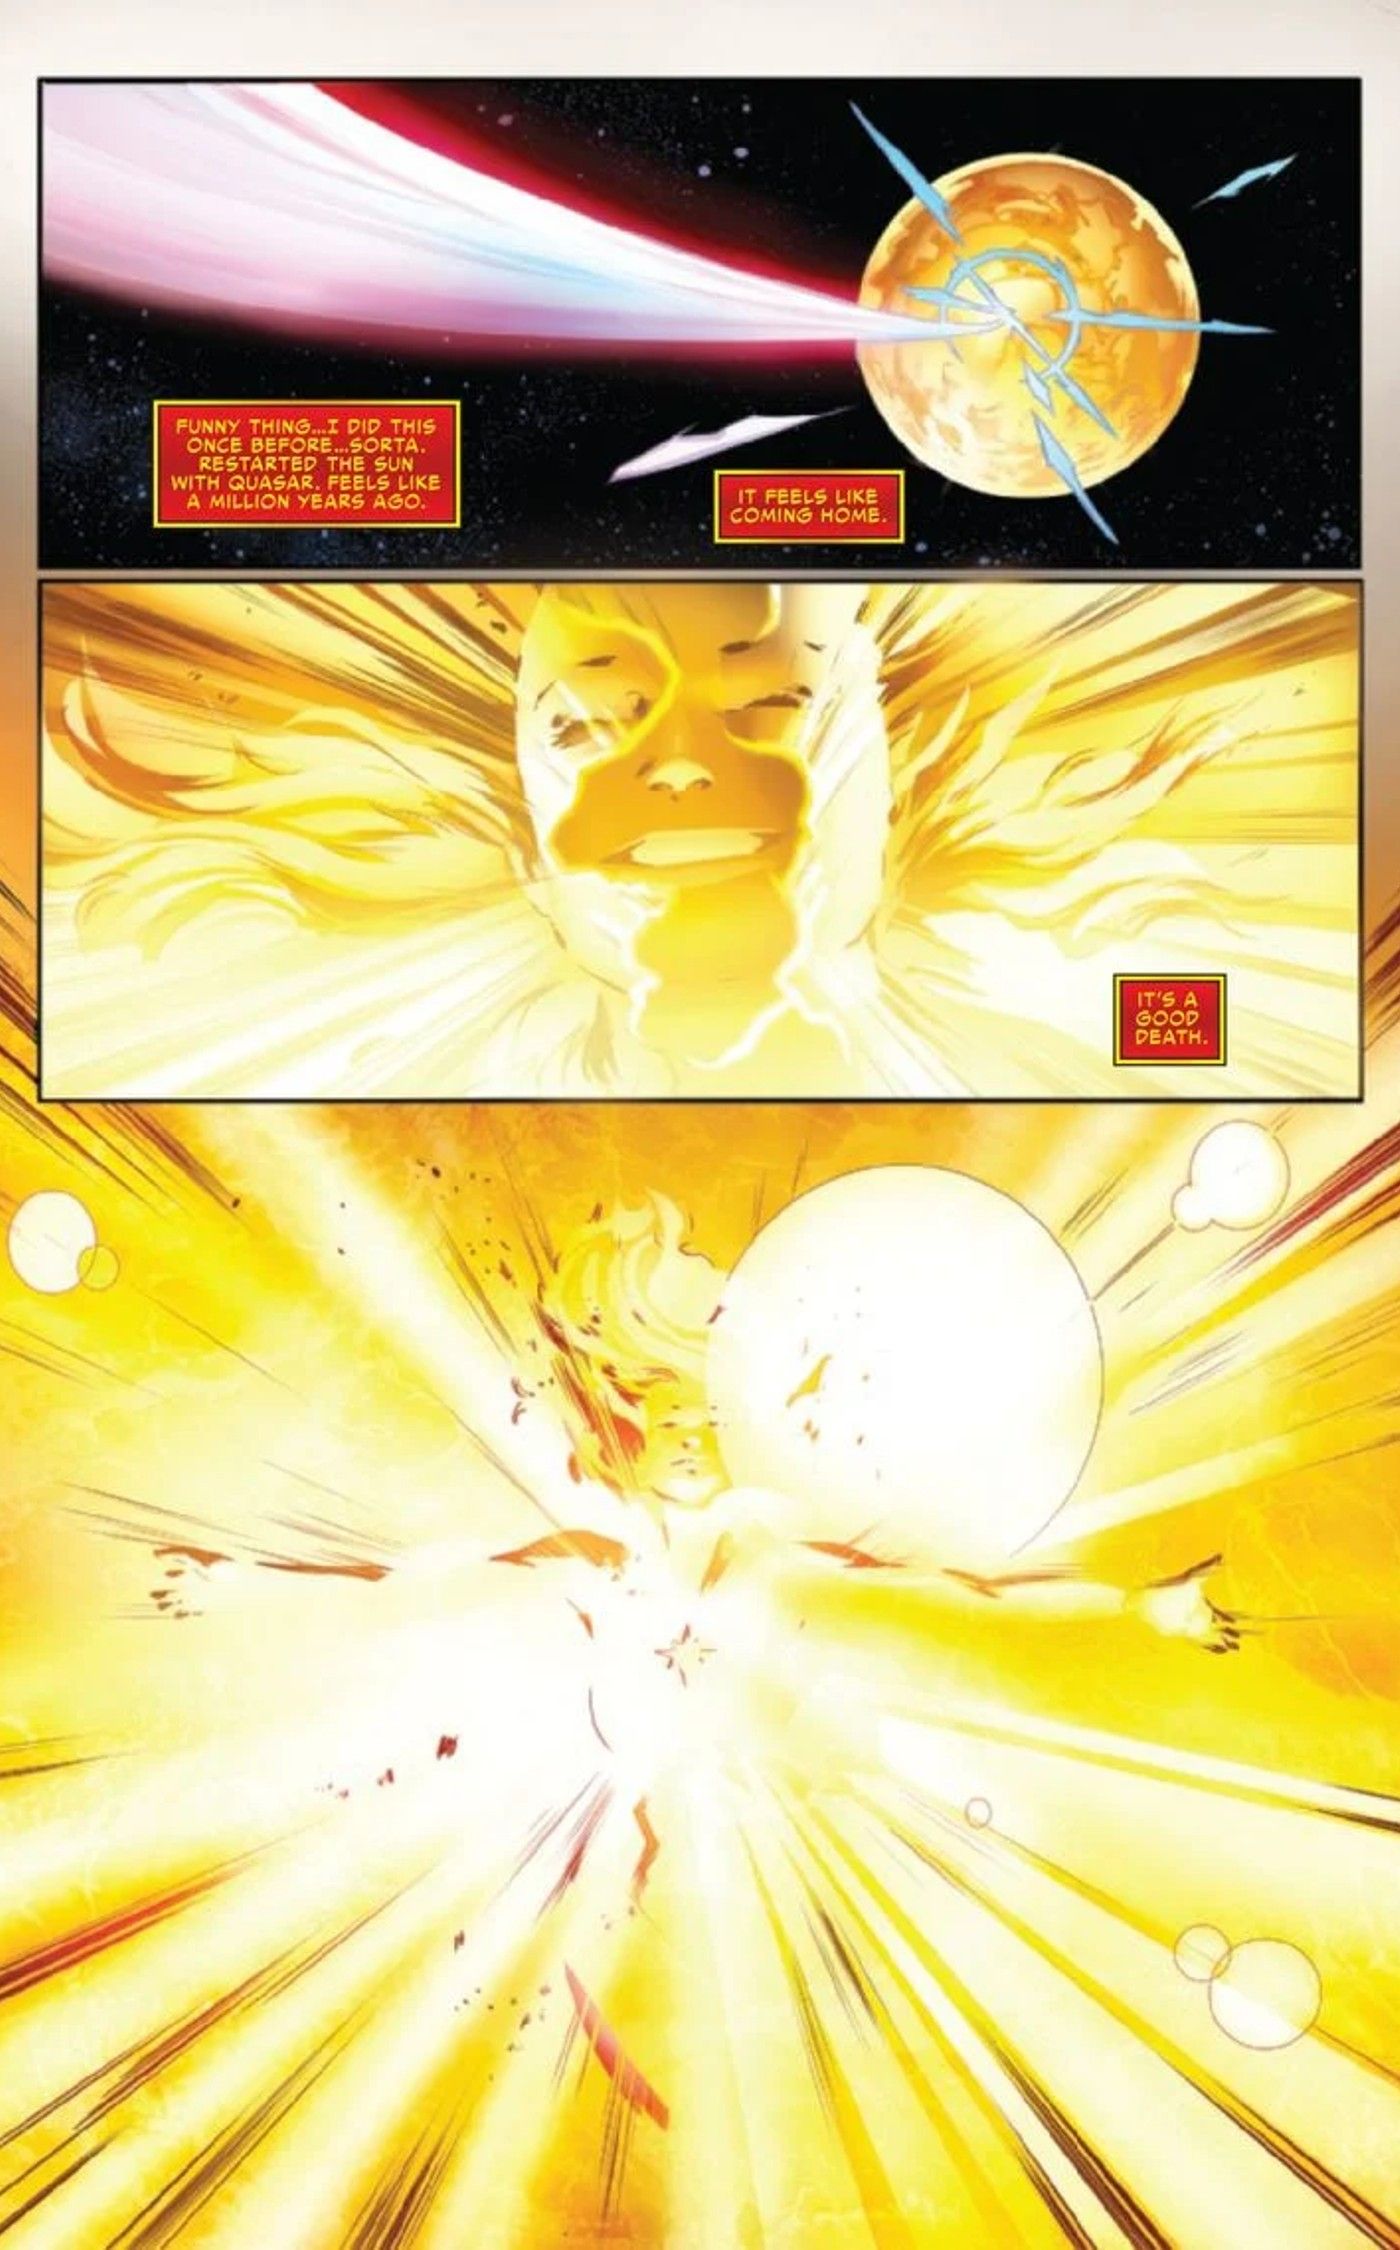 panels from ending of Captain Marvel The End #1